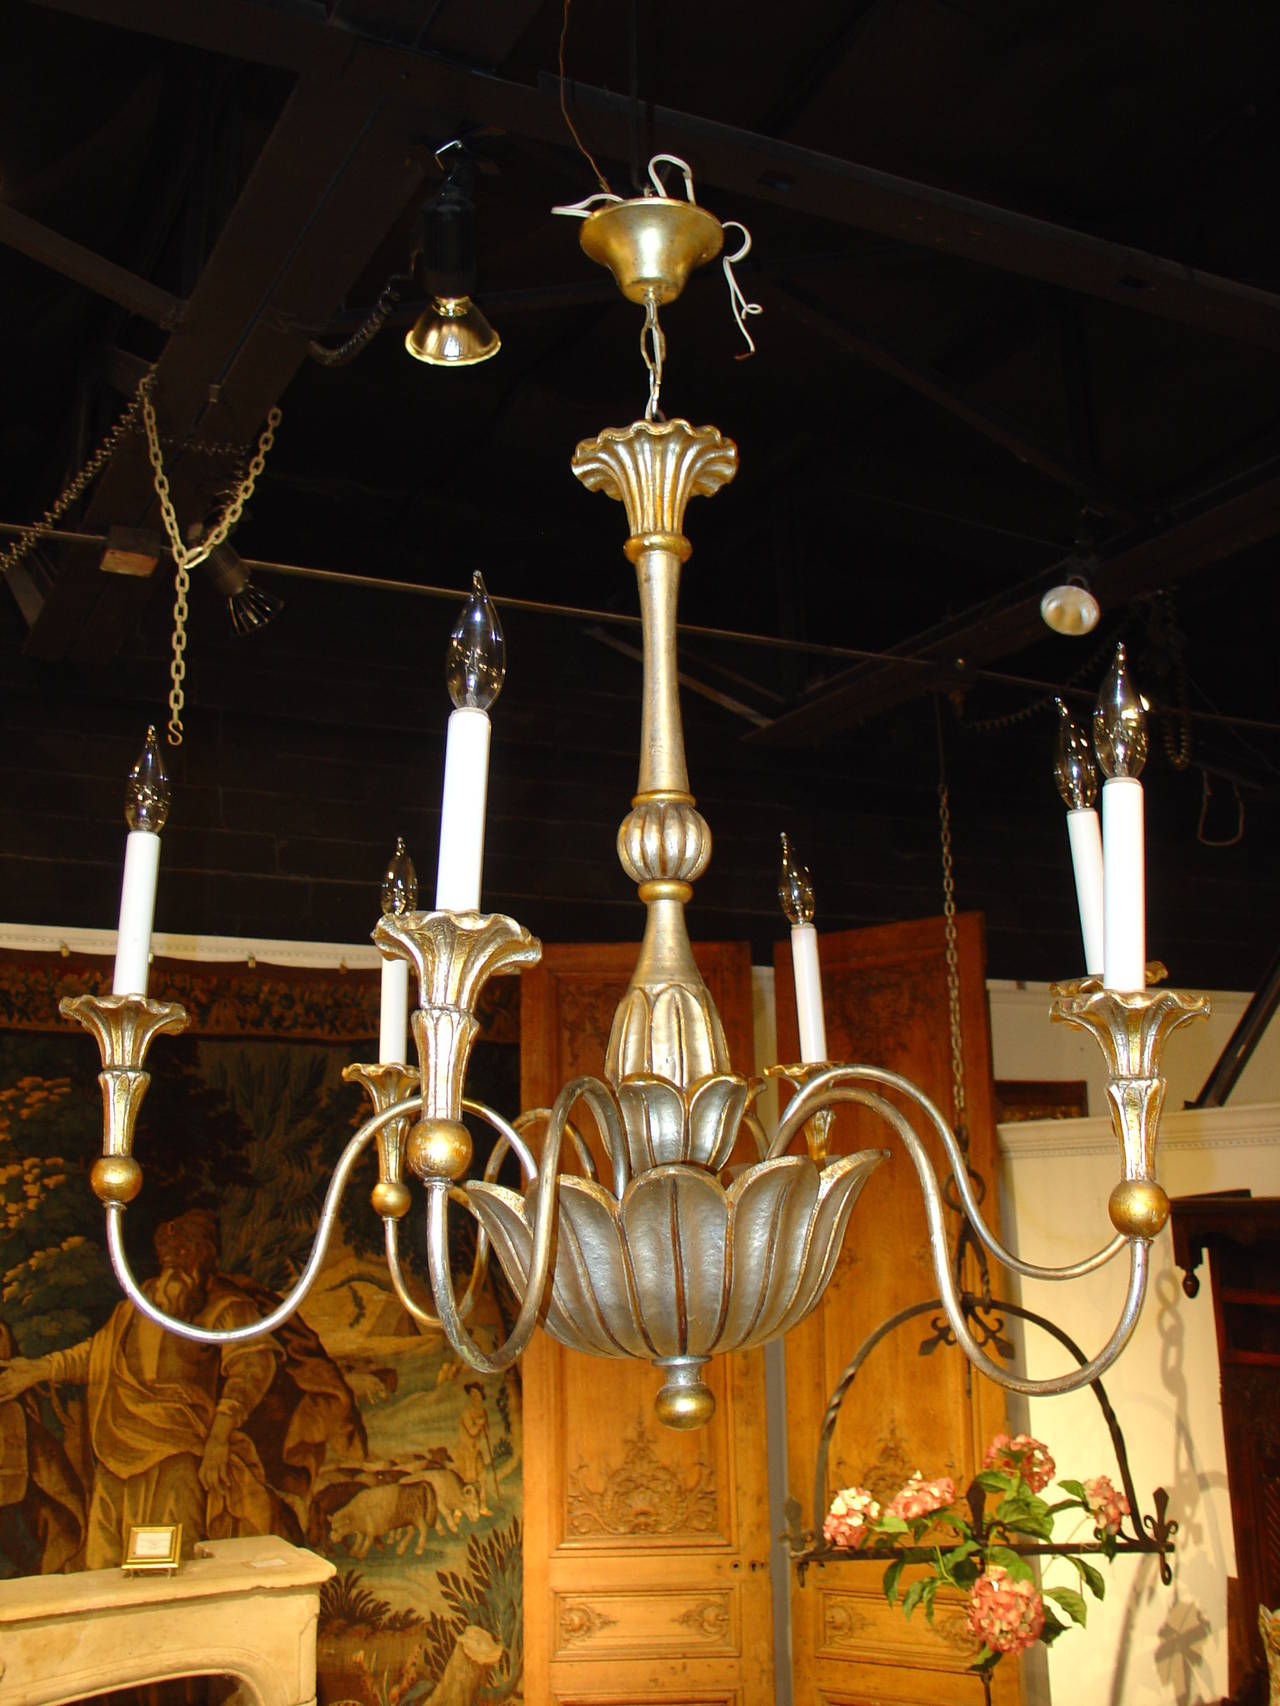 This graceful six arm chandelier combines a touch of nature in its design.  The bobeches are stylized hibiscus flowers while the circular shaped basin features water leaves.  The elegant metal arms are in a s-scroll shape.  Also, the shaft is lobed